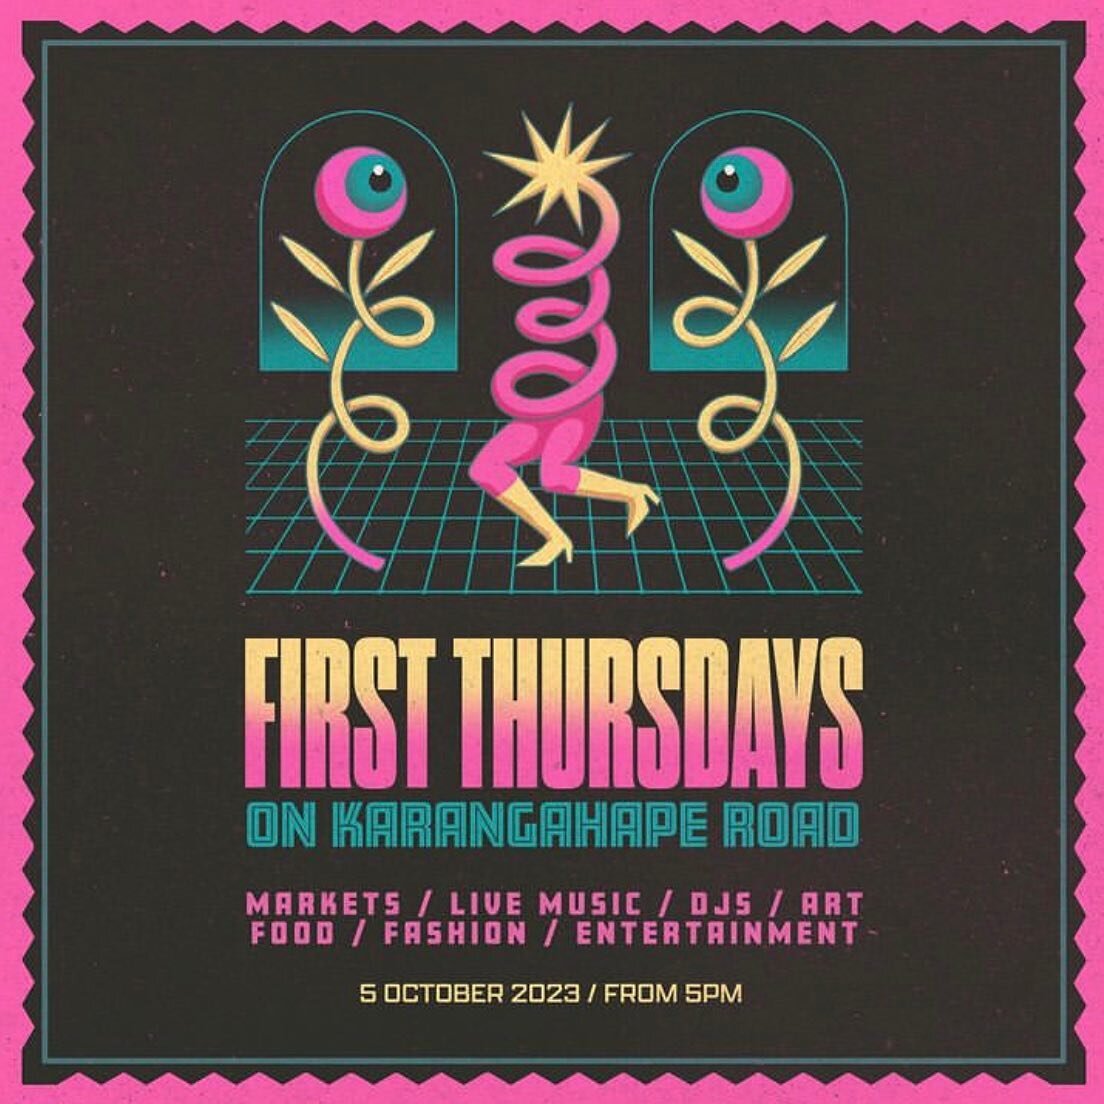 Join us for First Thursdays on Thursday 5th October for our monthly street party on Karangahape Road - Featuring a lineup of local Musicians and DJs, markets, workshops and kai💫💃🏼🙌🏻 
Full Programme below:

𝗣𝗢𝗖𝗞𝗘𝗧 𝗣𝗔𝗥𝗞 𝗦𝗧𝗔𝗚𝗘 - top 